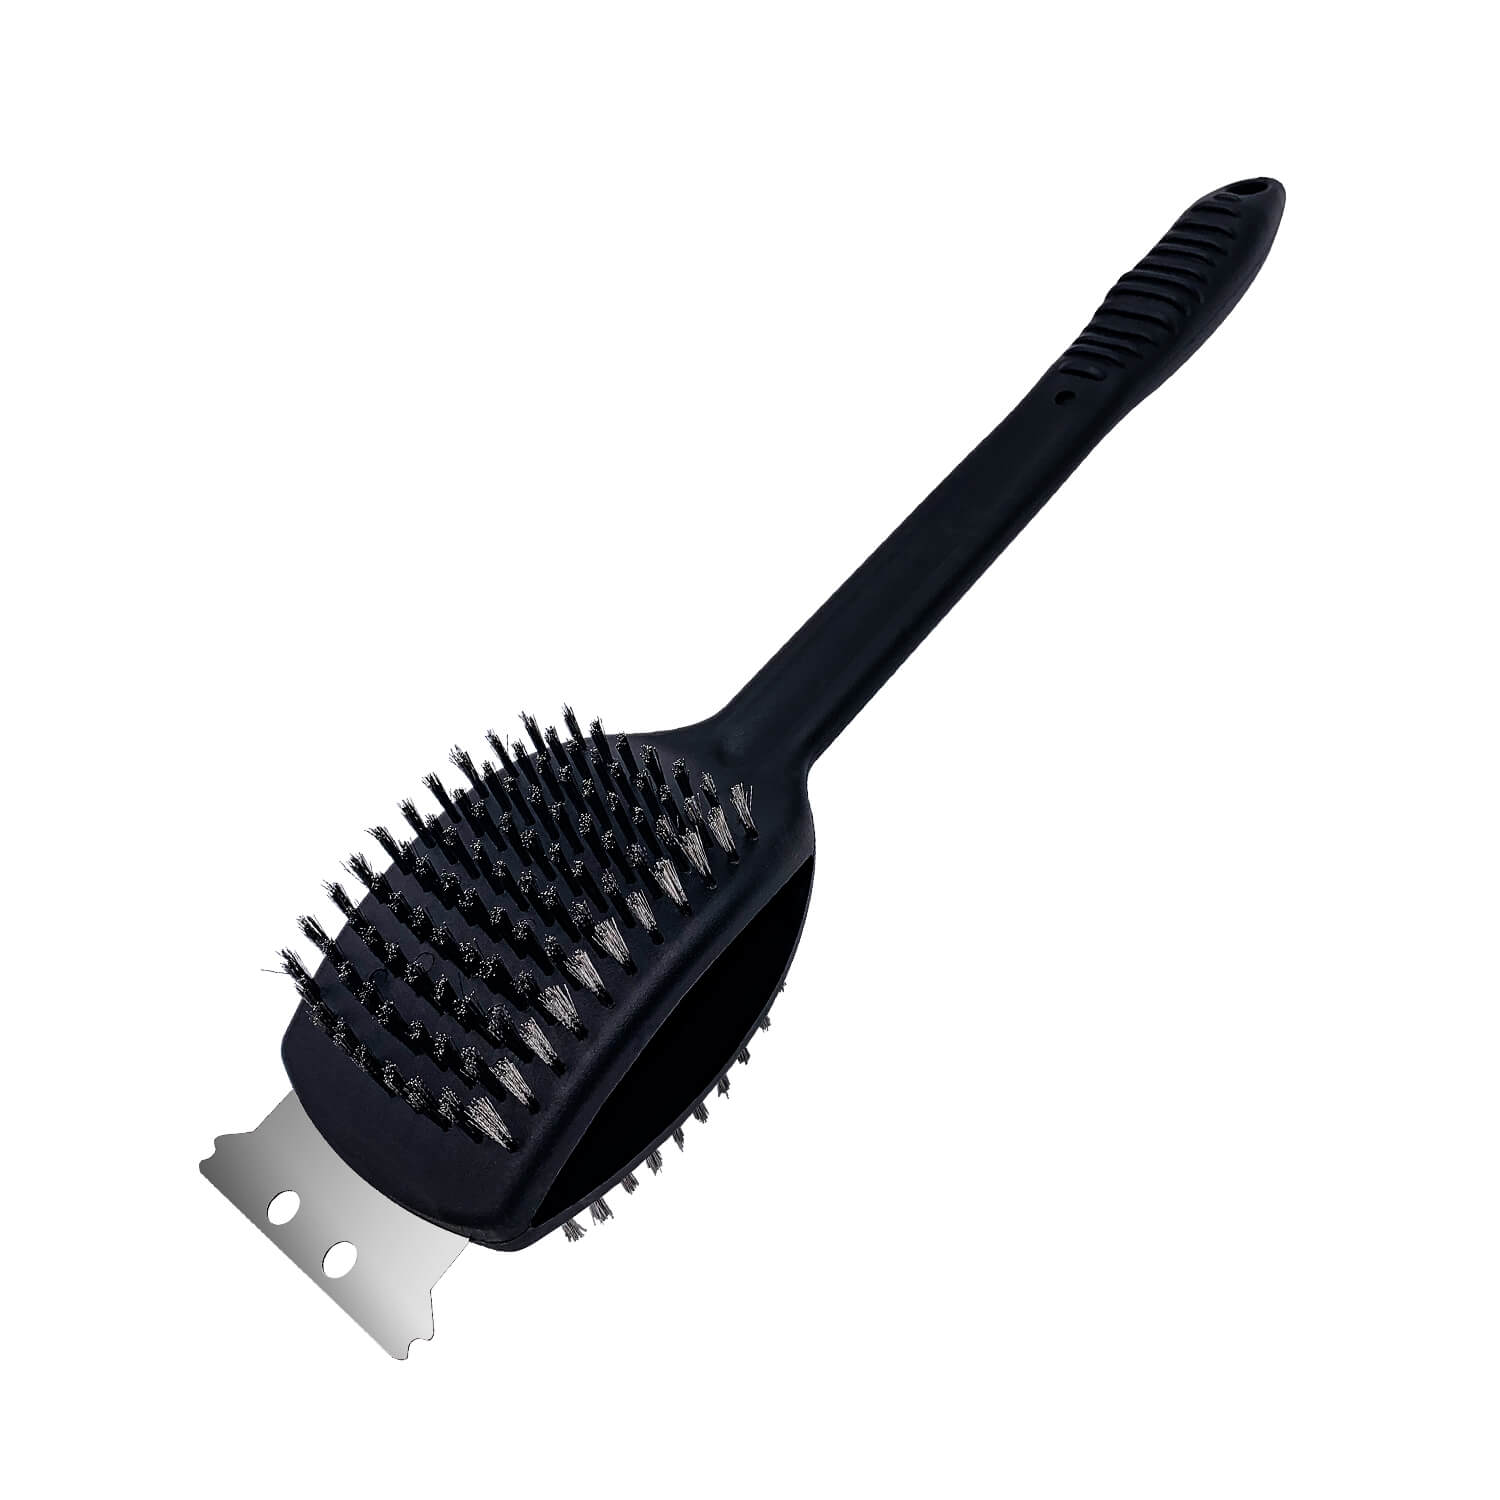 Double-Sided Grill Brush and Scraper, 17-Inch Long Non-Slip Handle -YAOAWE 